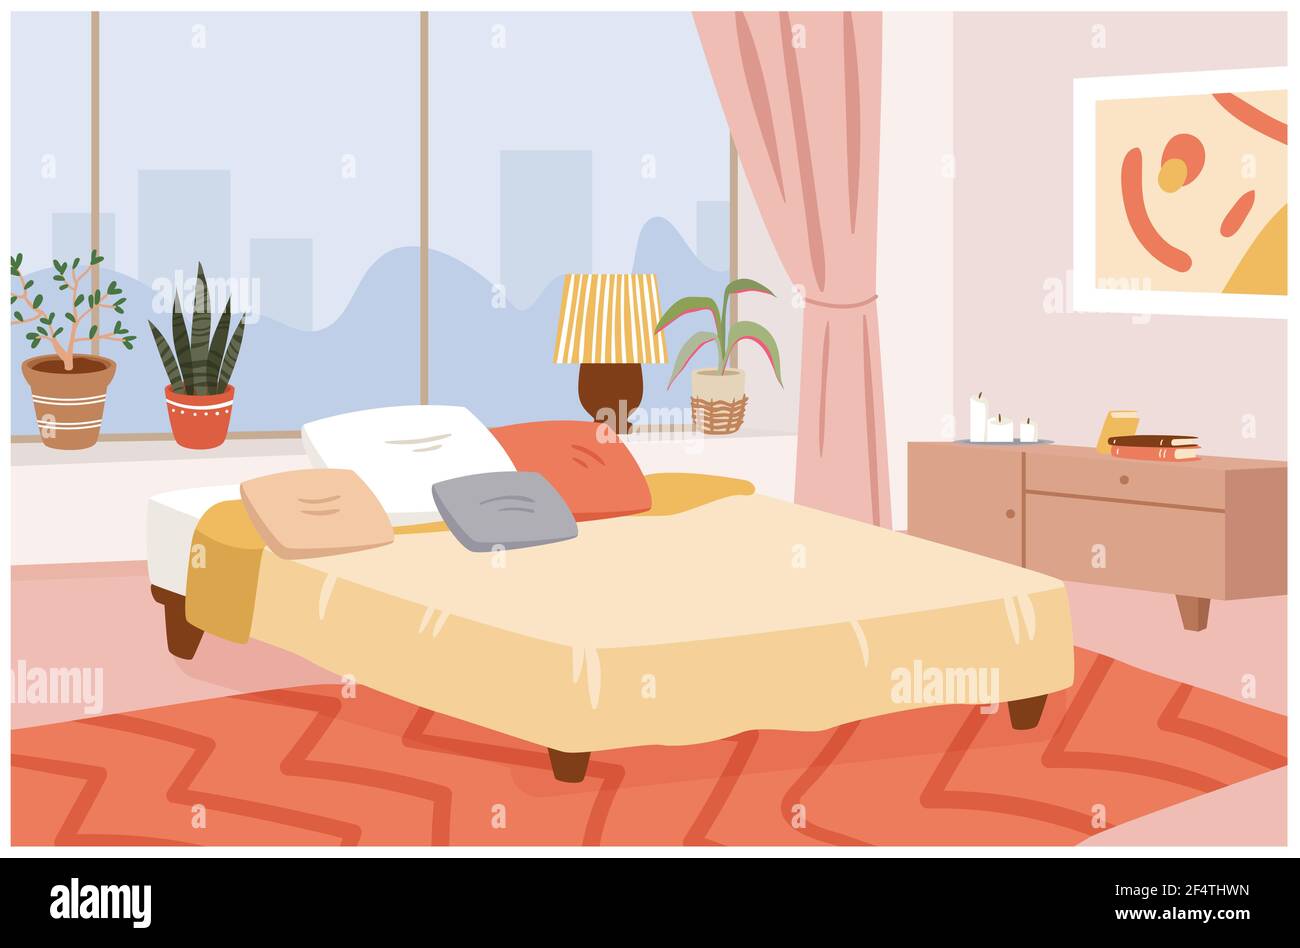 Bedroom hygge home interior, room design apartment with window, cozy bed and pillows Stock Vector